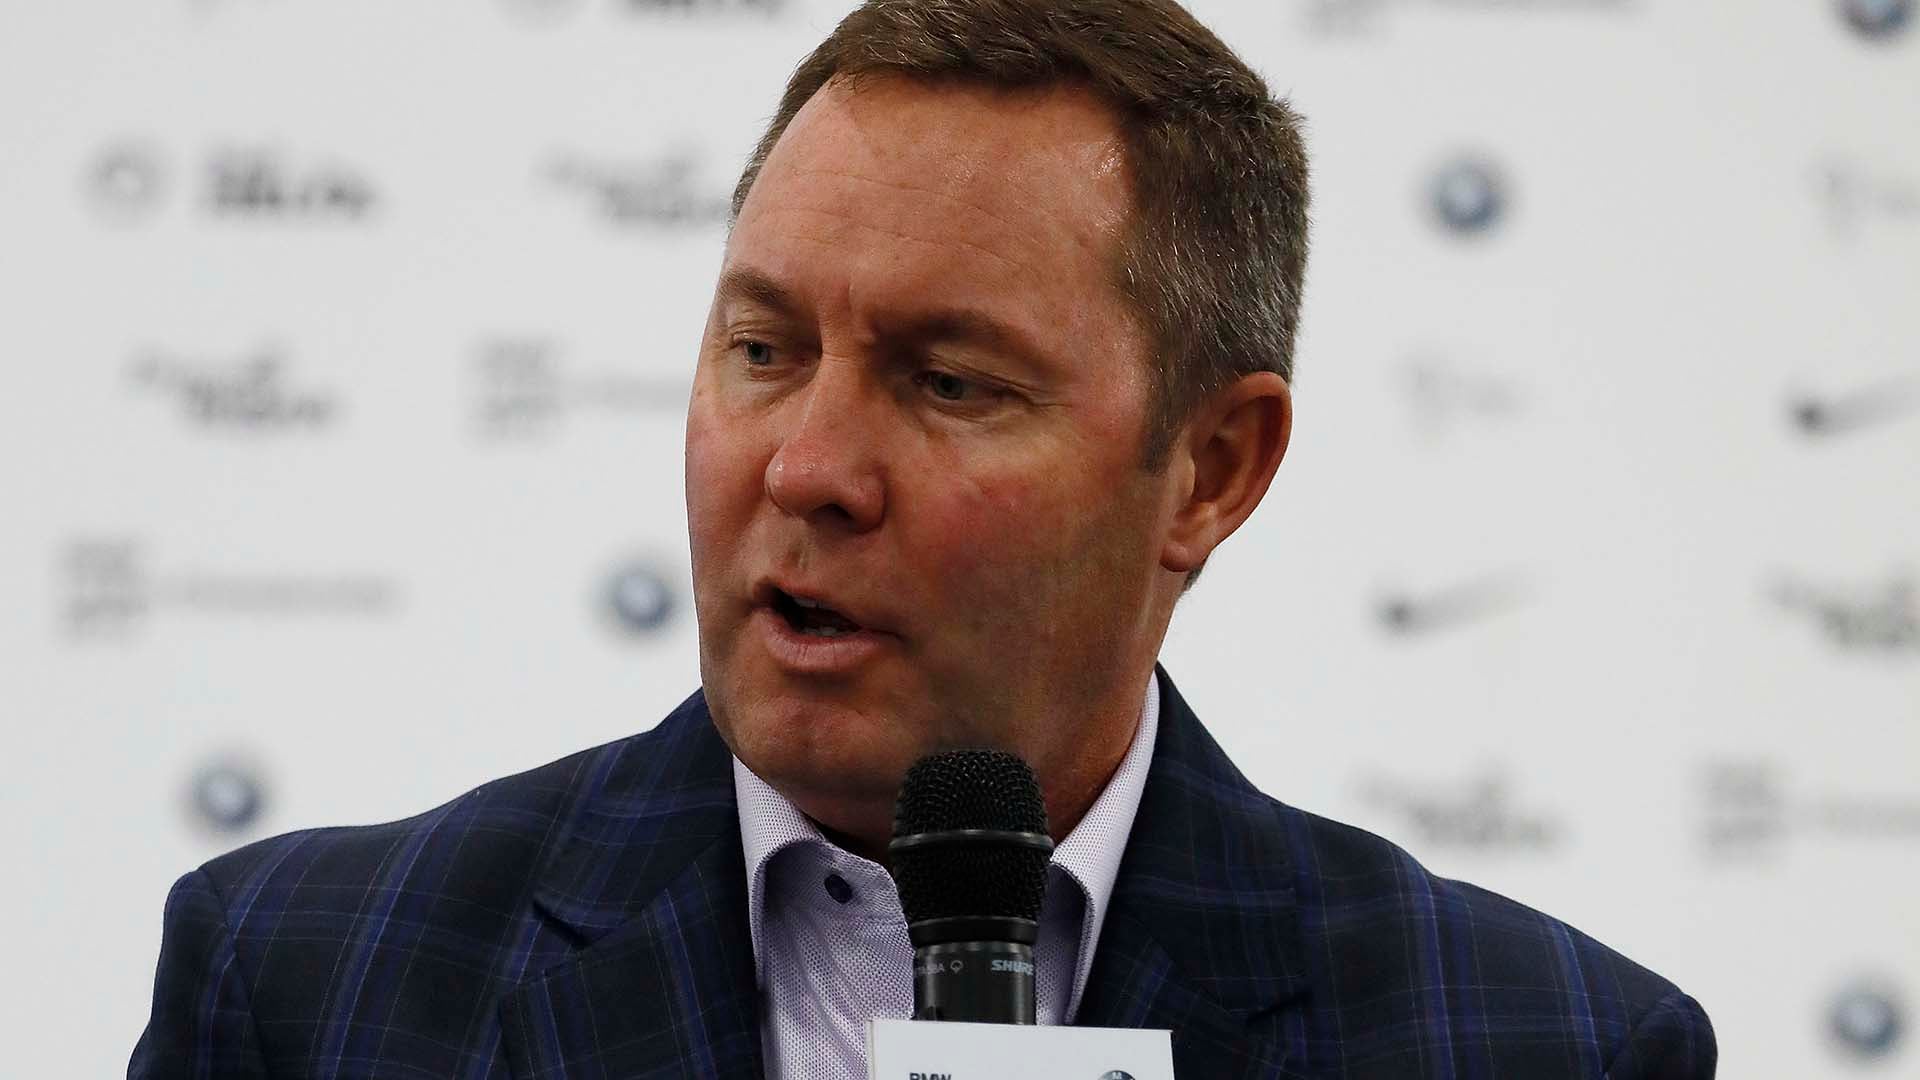 Mike Whan on LPGA taking financial hit due to cancellations: ‘It’s staggering’